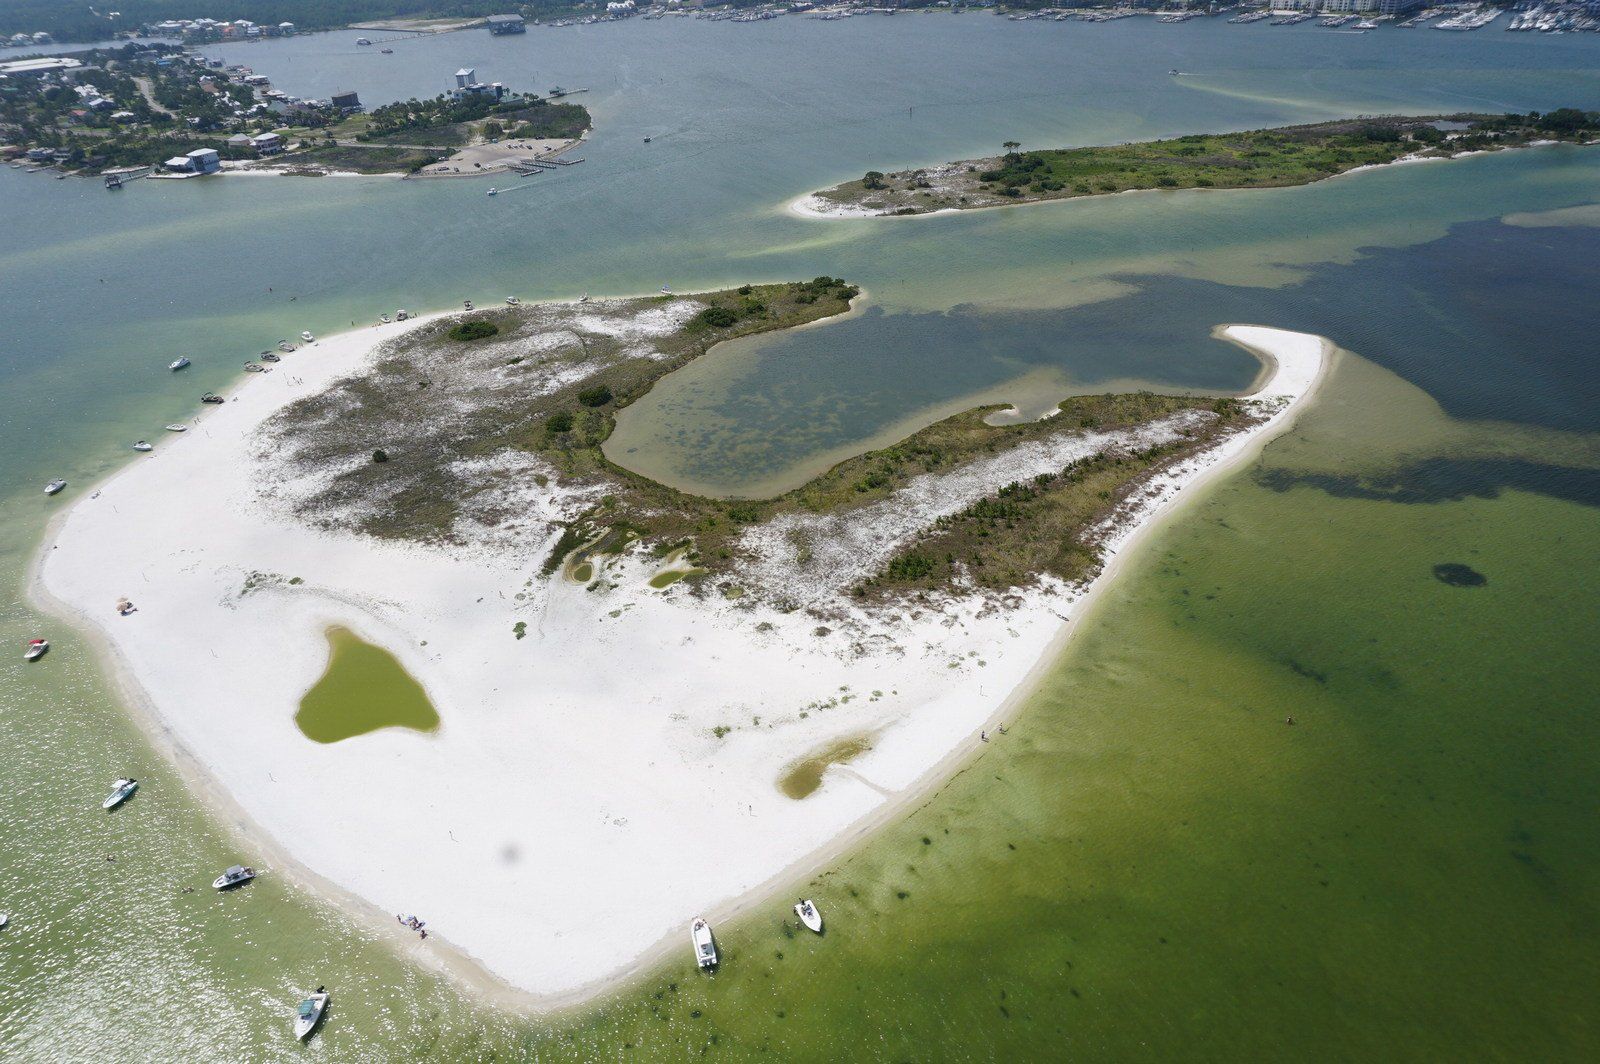 Four-year watershed project for Perdido Bay gets $12.8 million award from NOAA.